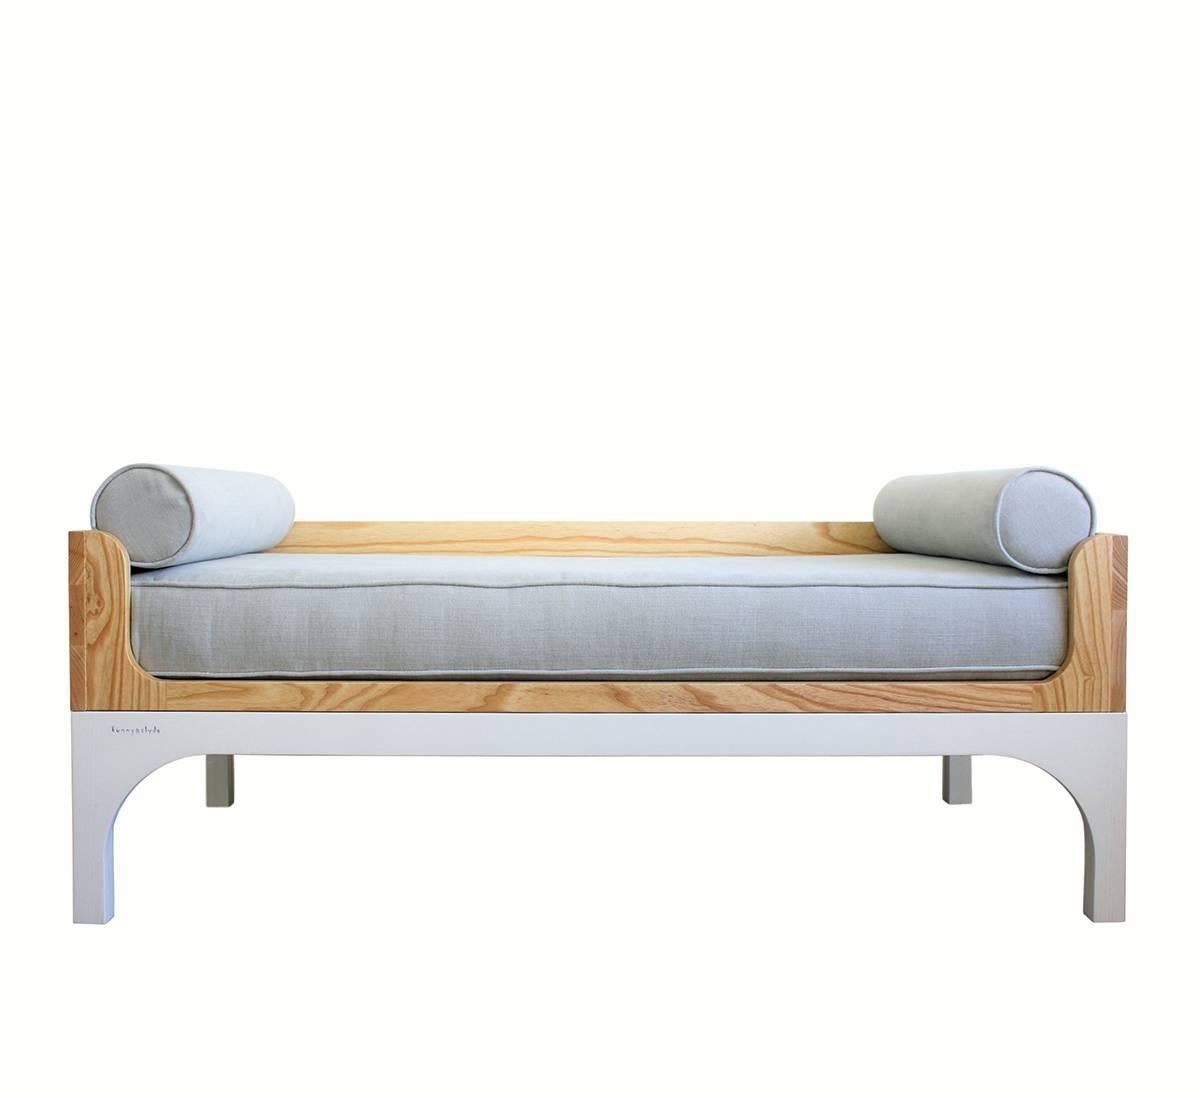 Inspired by the playful curves and geometry of the Art Deco period, the Coco toddler bed is a transitional bed and can be used up until roughly 5-6 years old. Thereafter it can be converted into a daybed with the addition of the conversion kit